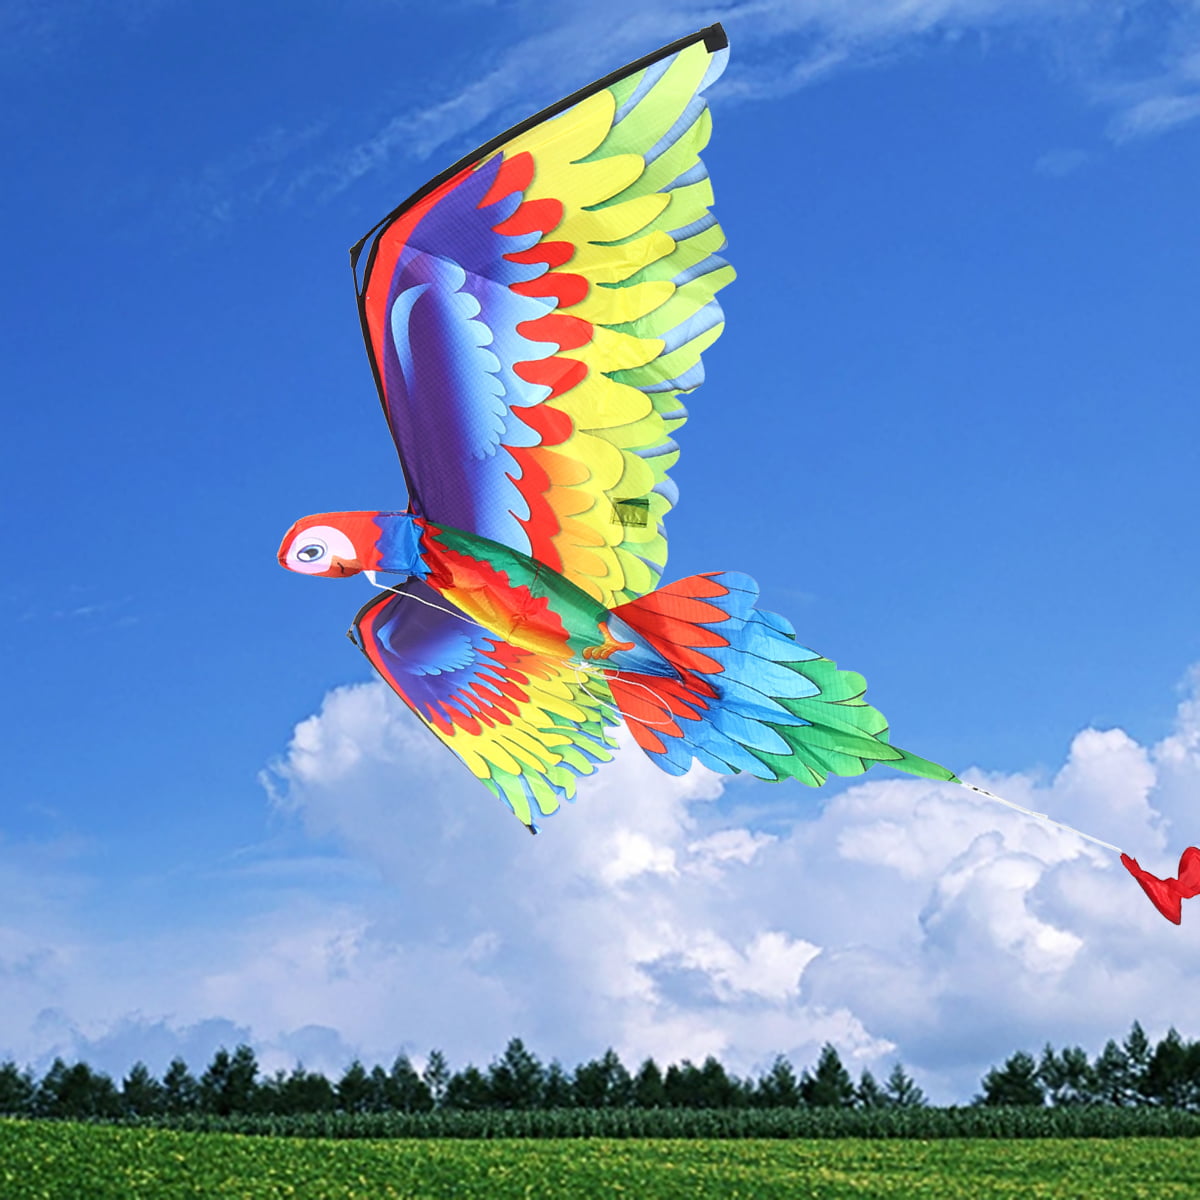 3D Parrot Kite Single Line Kids Adults Children's Outdoor Funny Games Toy P0O4 